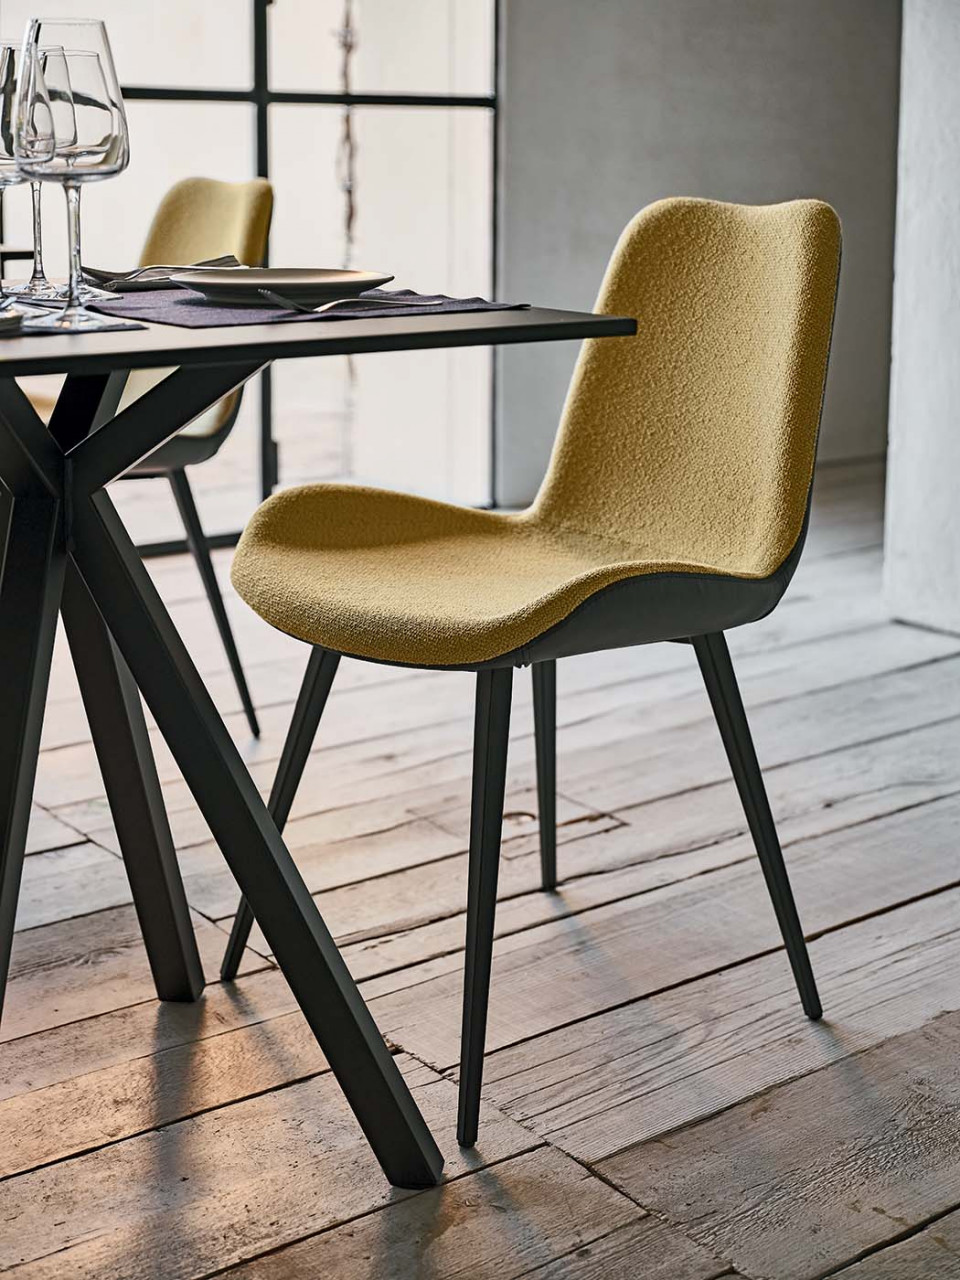 Dalia chair with yellow and black upholstery